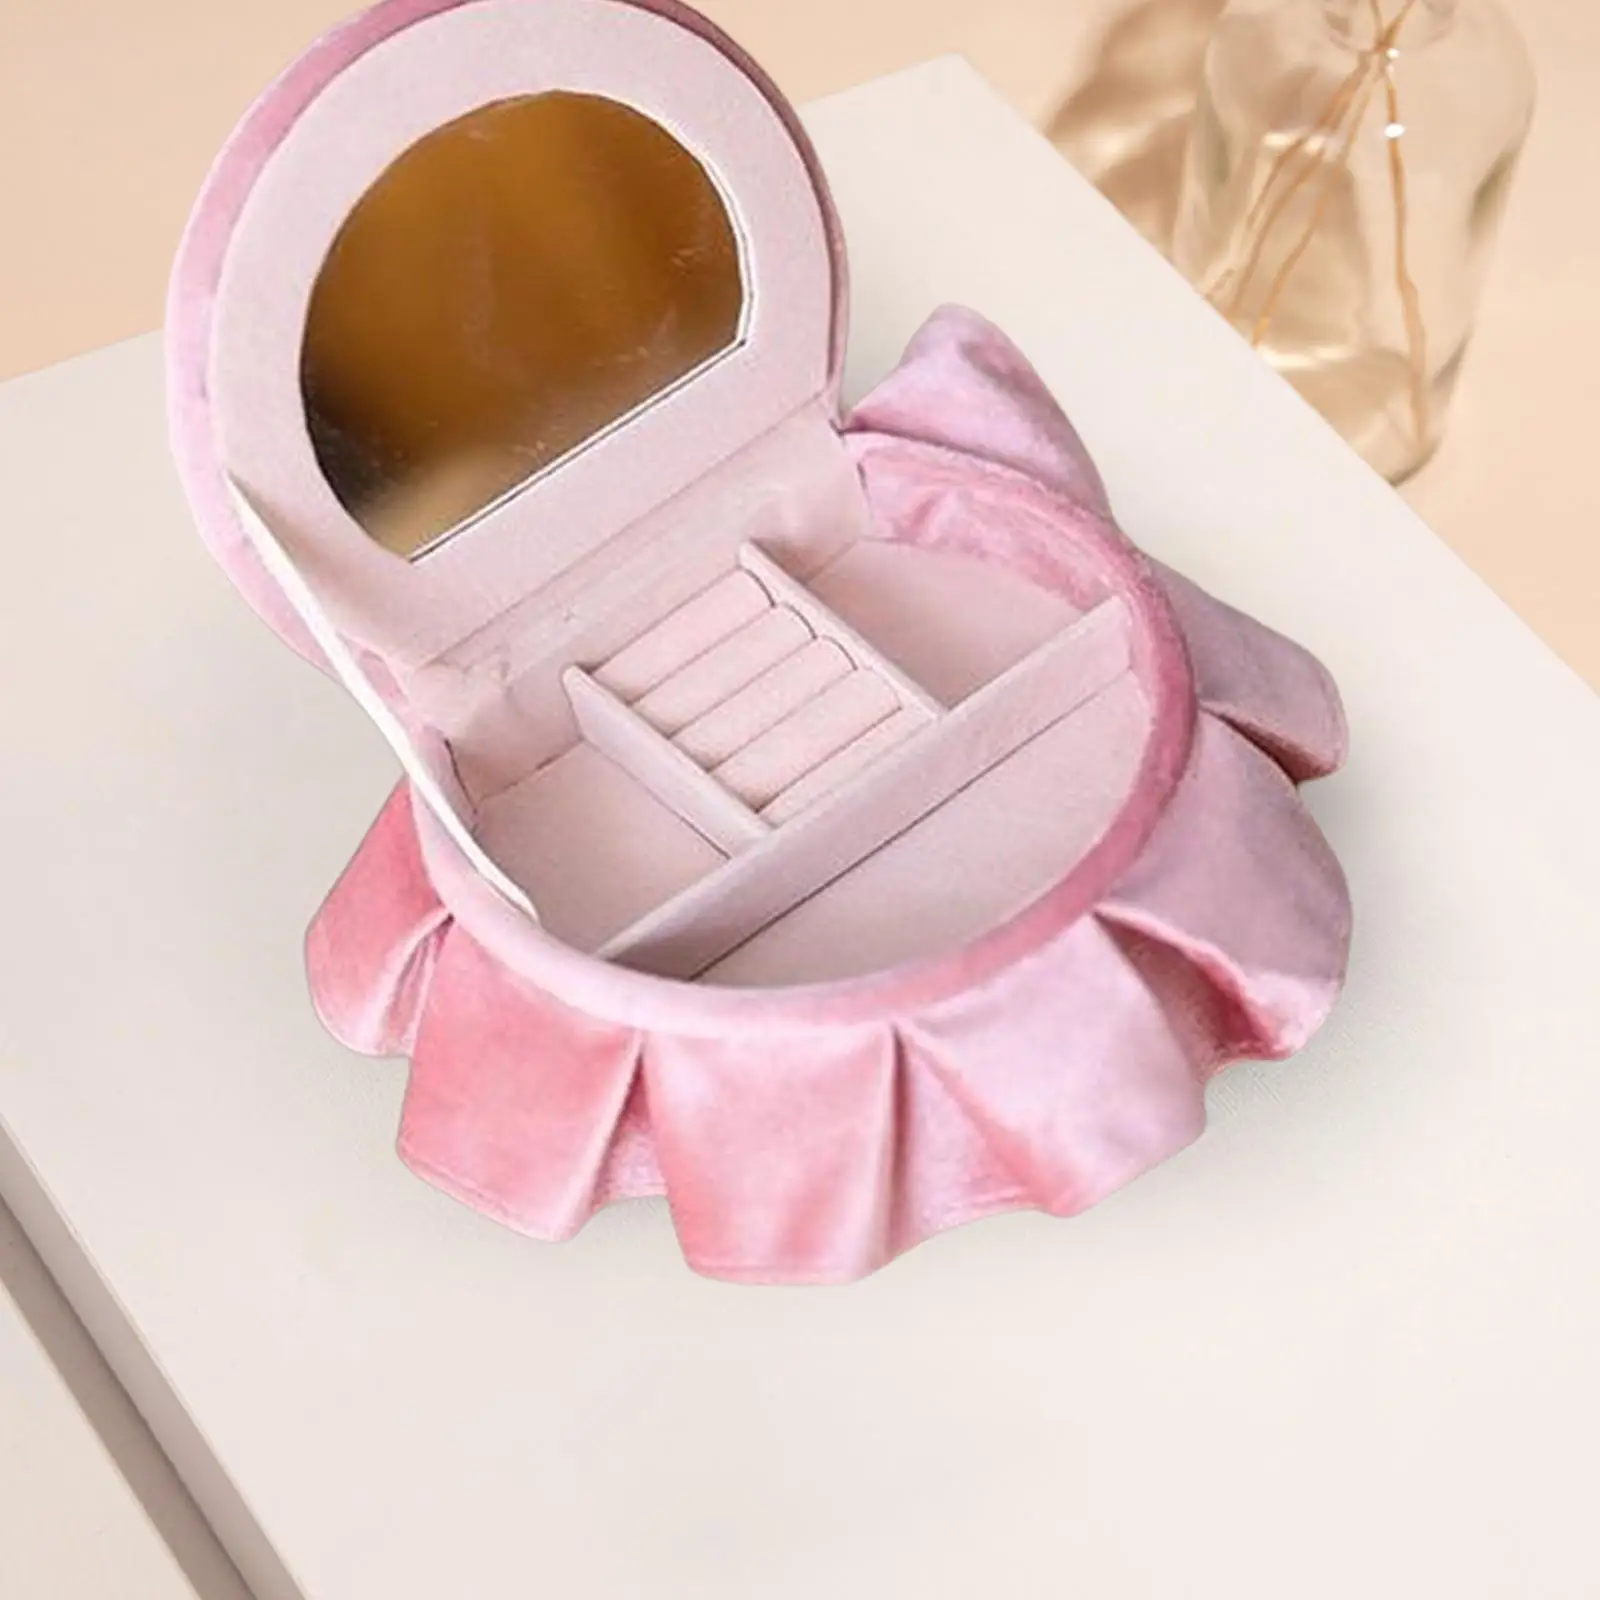 Dollhouse Bed Ornaments with Mirror Decoration Dolls Accessories Pink Jewelry Storage Case Makeup Jewelry Box for Dollhouse Kids